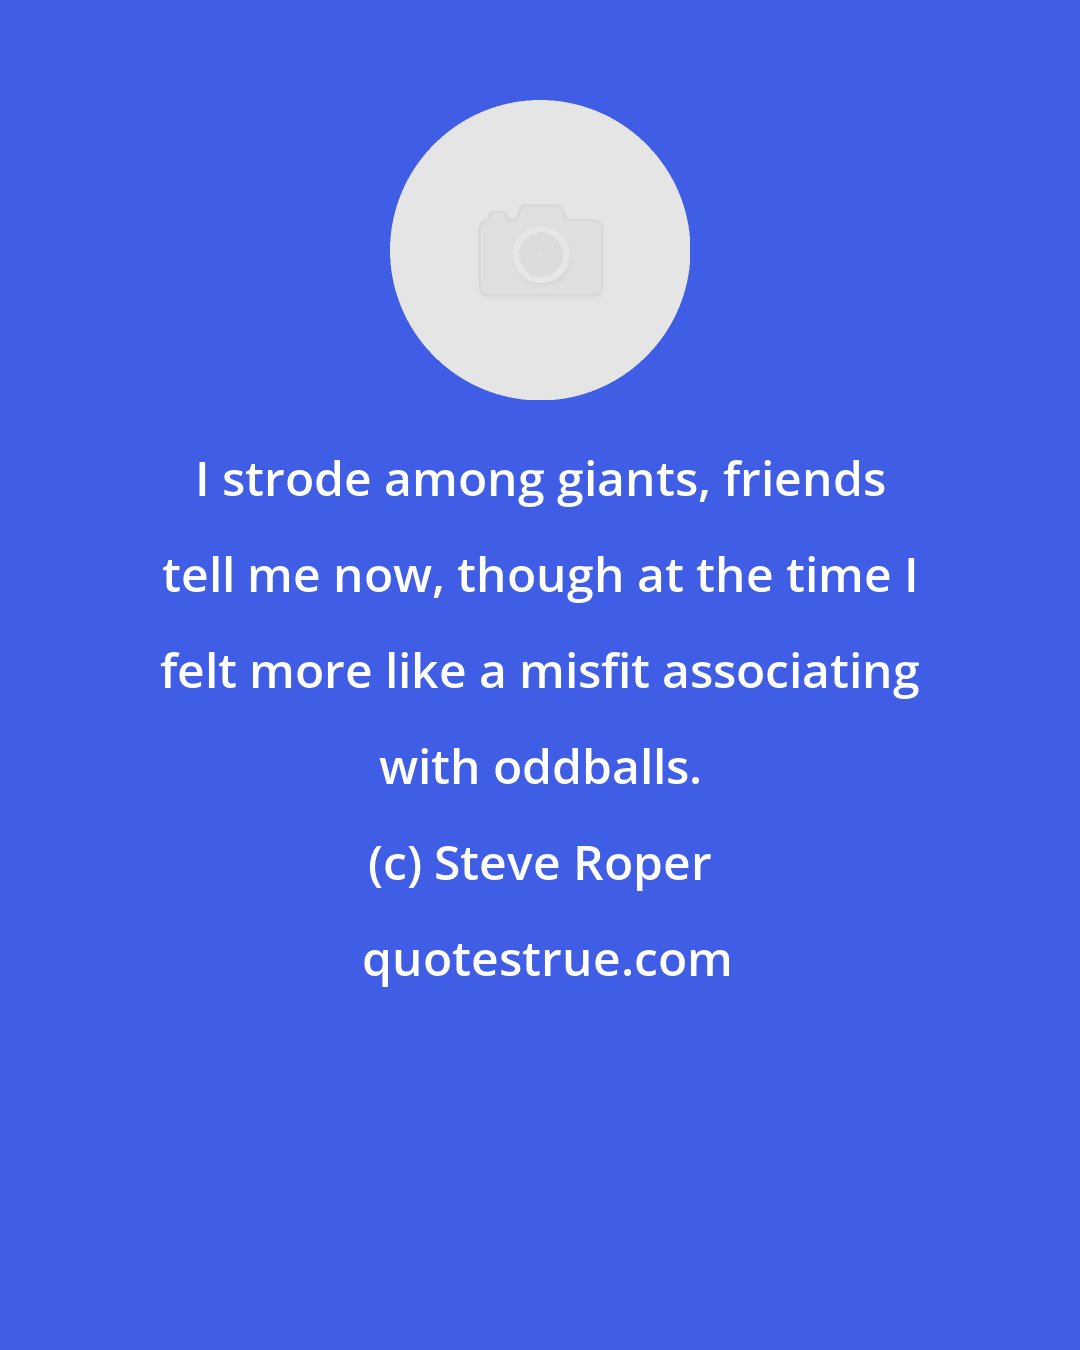 Steve Roper: I strode among giants, friends tell me now, though at the time I felt more like a misfit associating with oddballs.